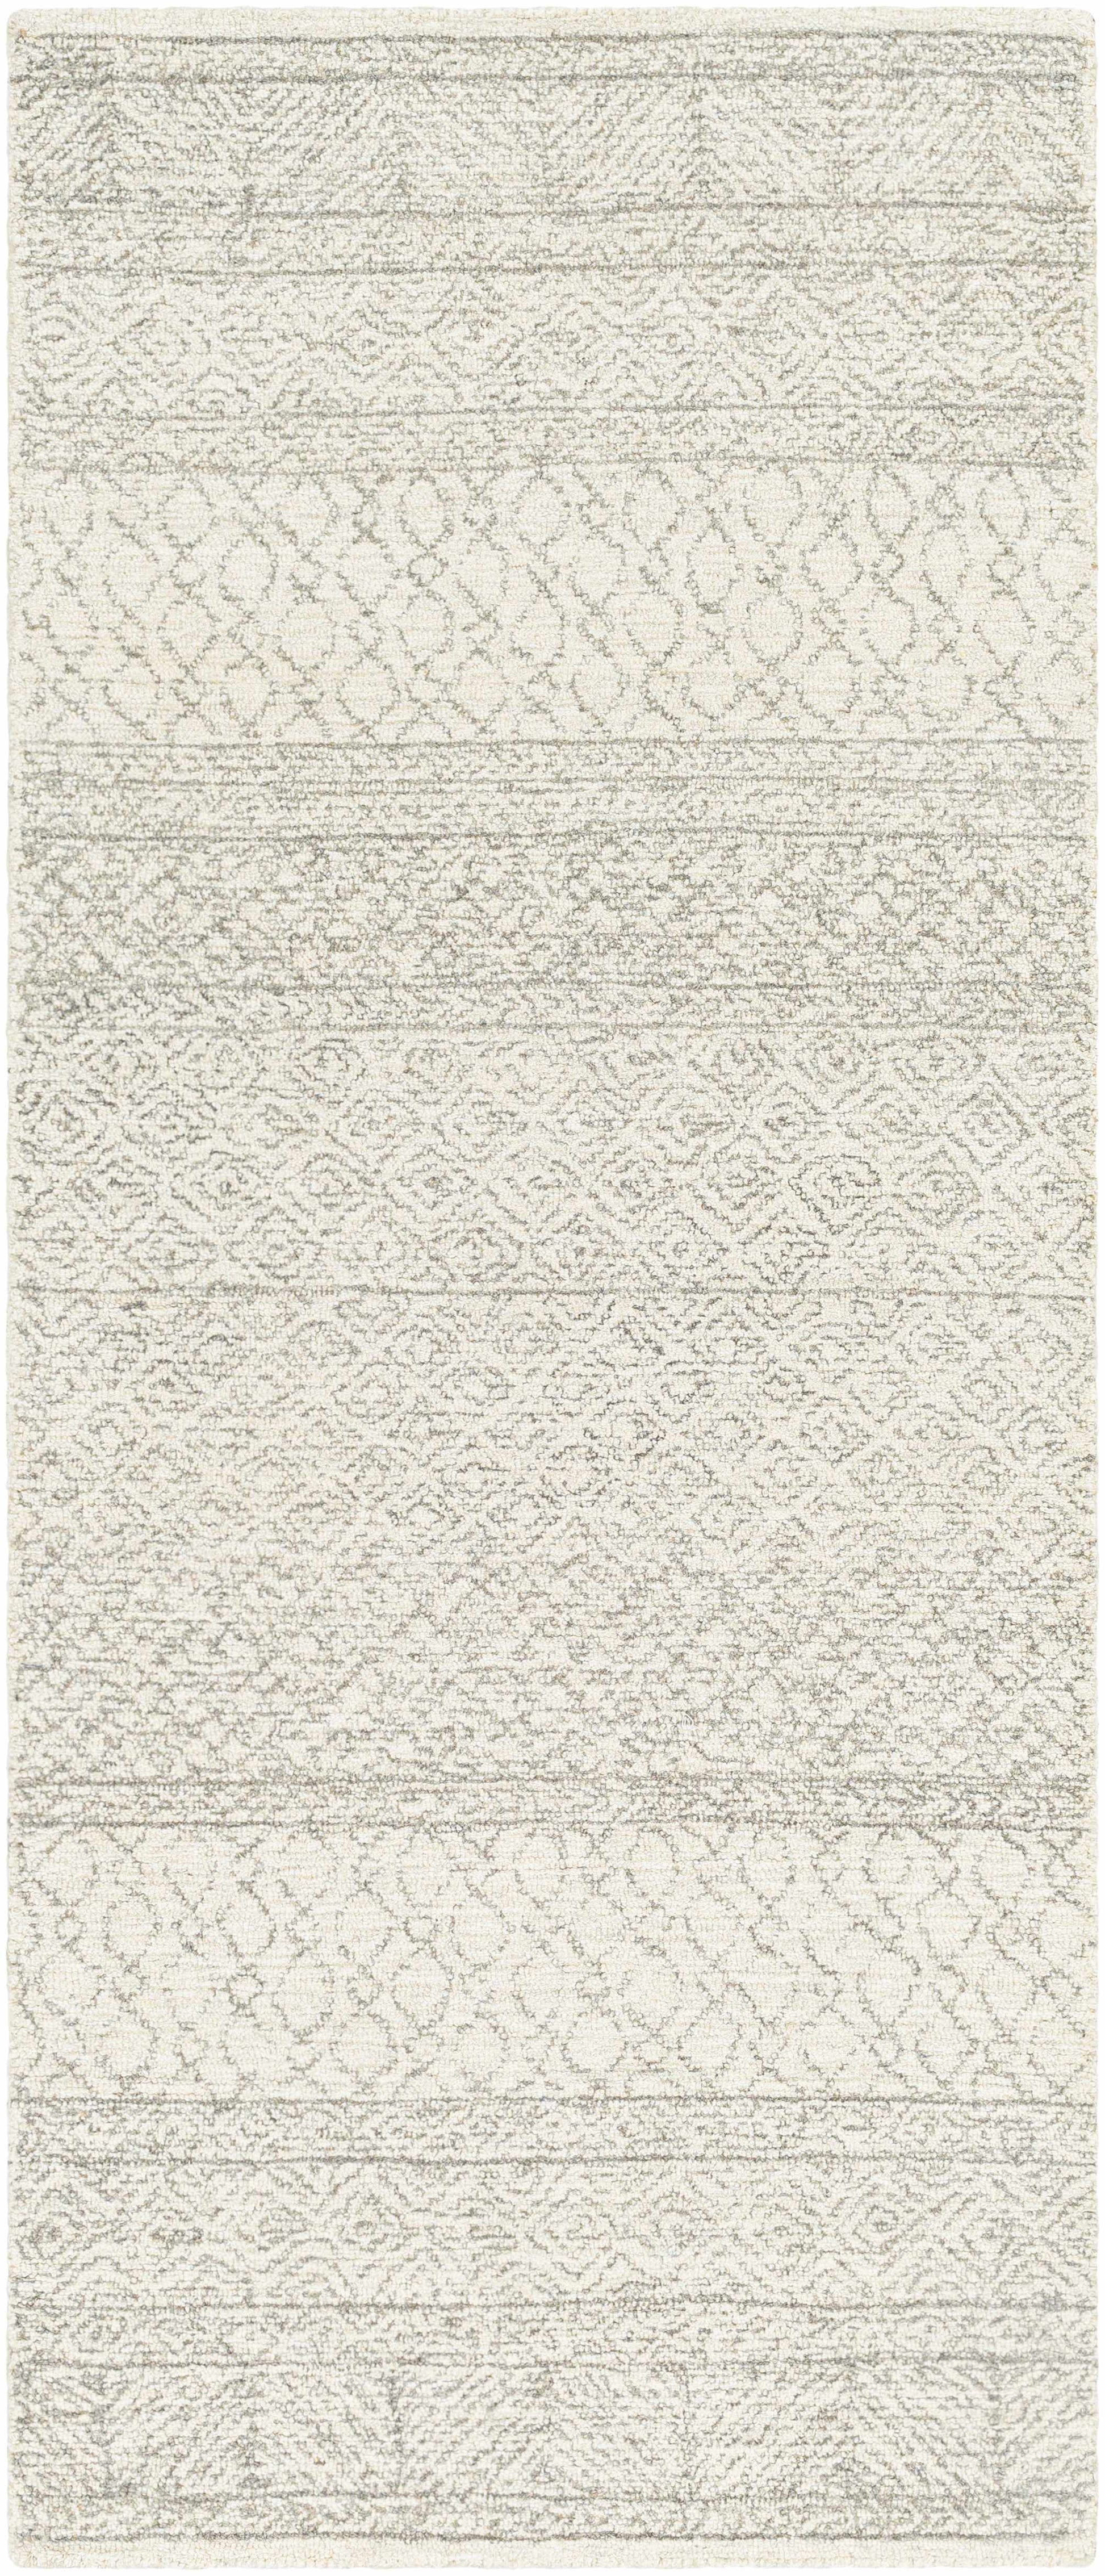 Boutique Rugs Rugs 2'6" x 6' Runner Basinger Wool Area Rug